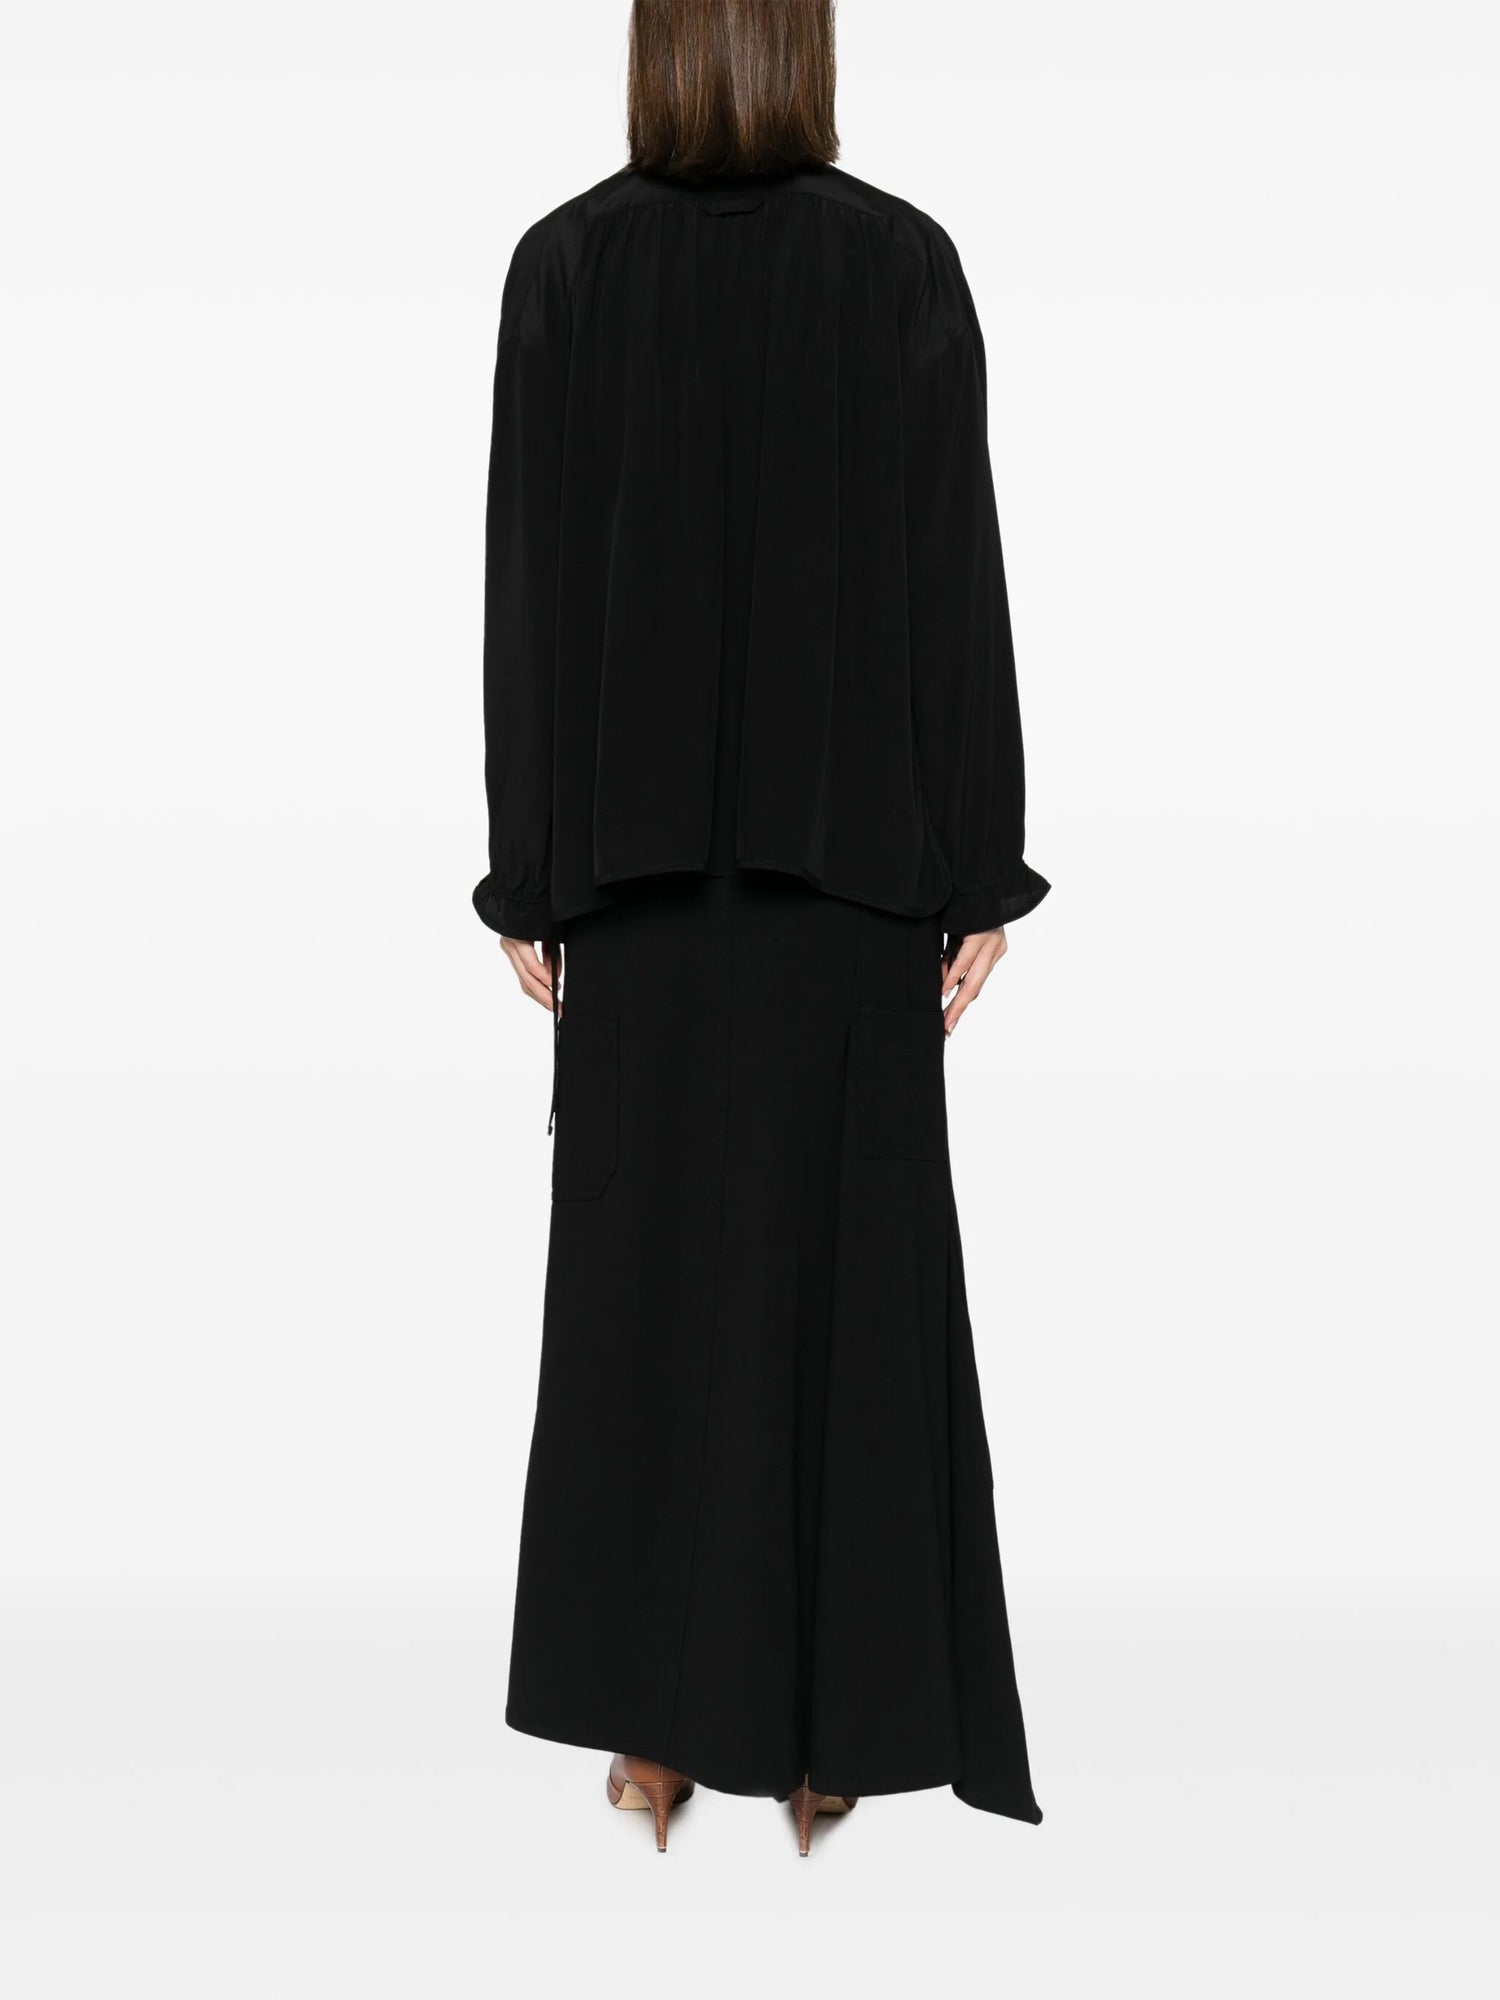 SOPHISTICATED VOLUMES blouse, pure black